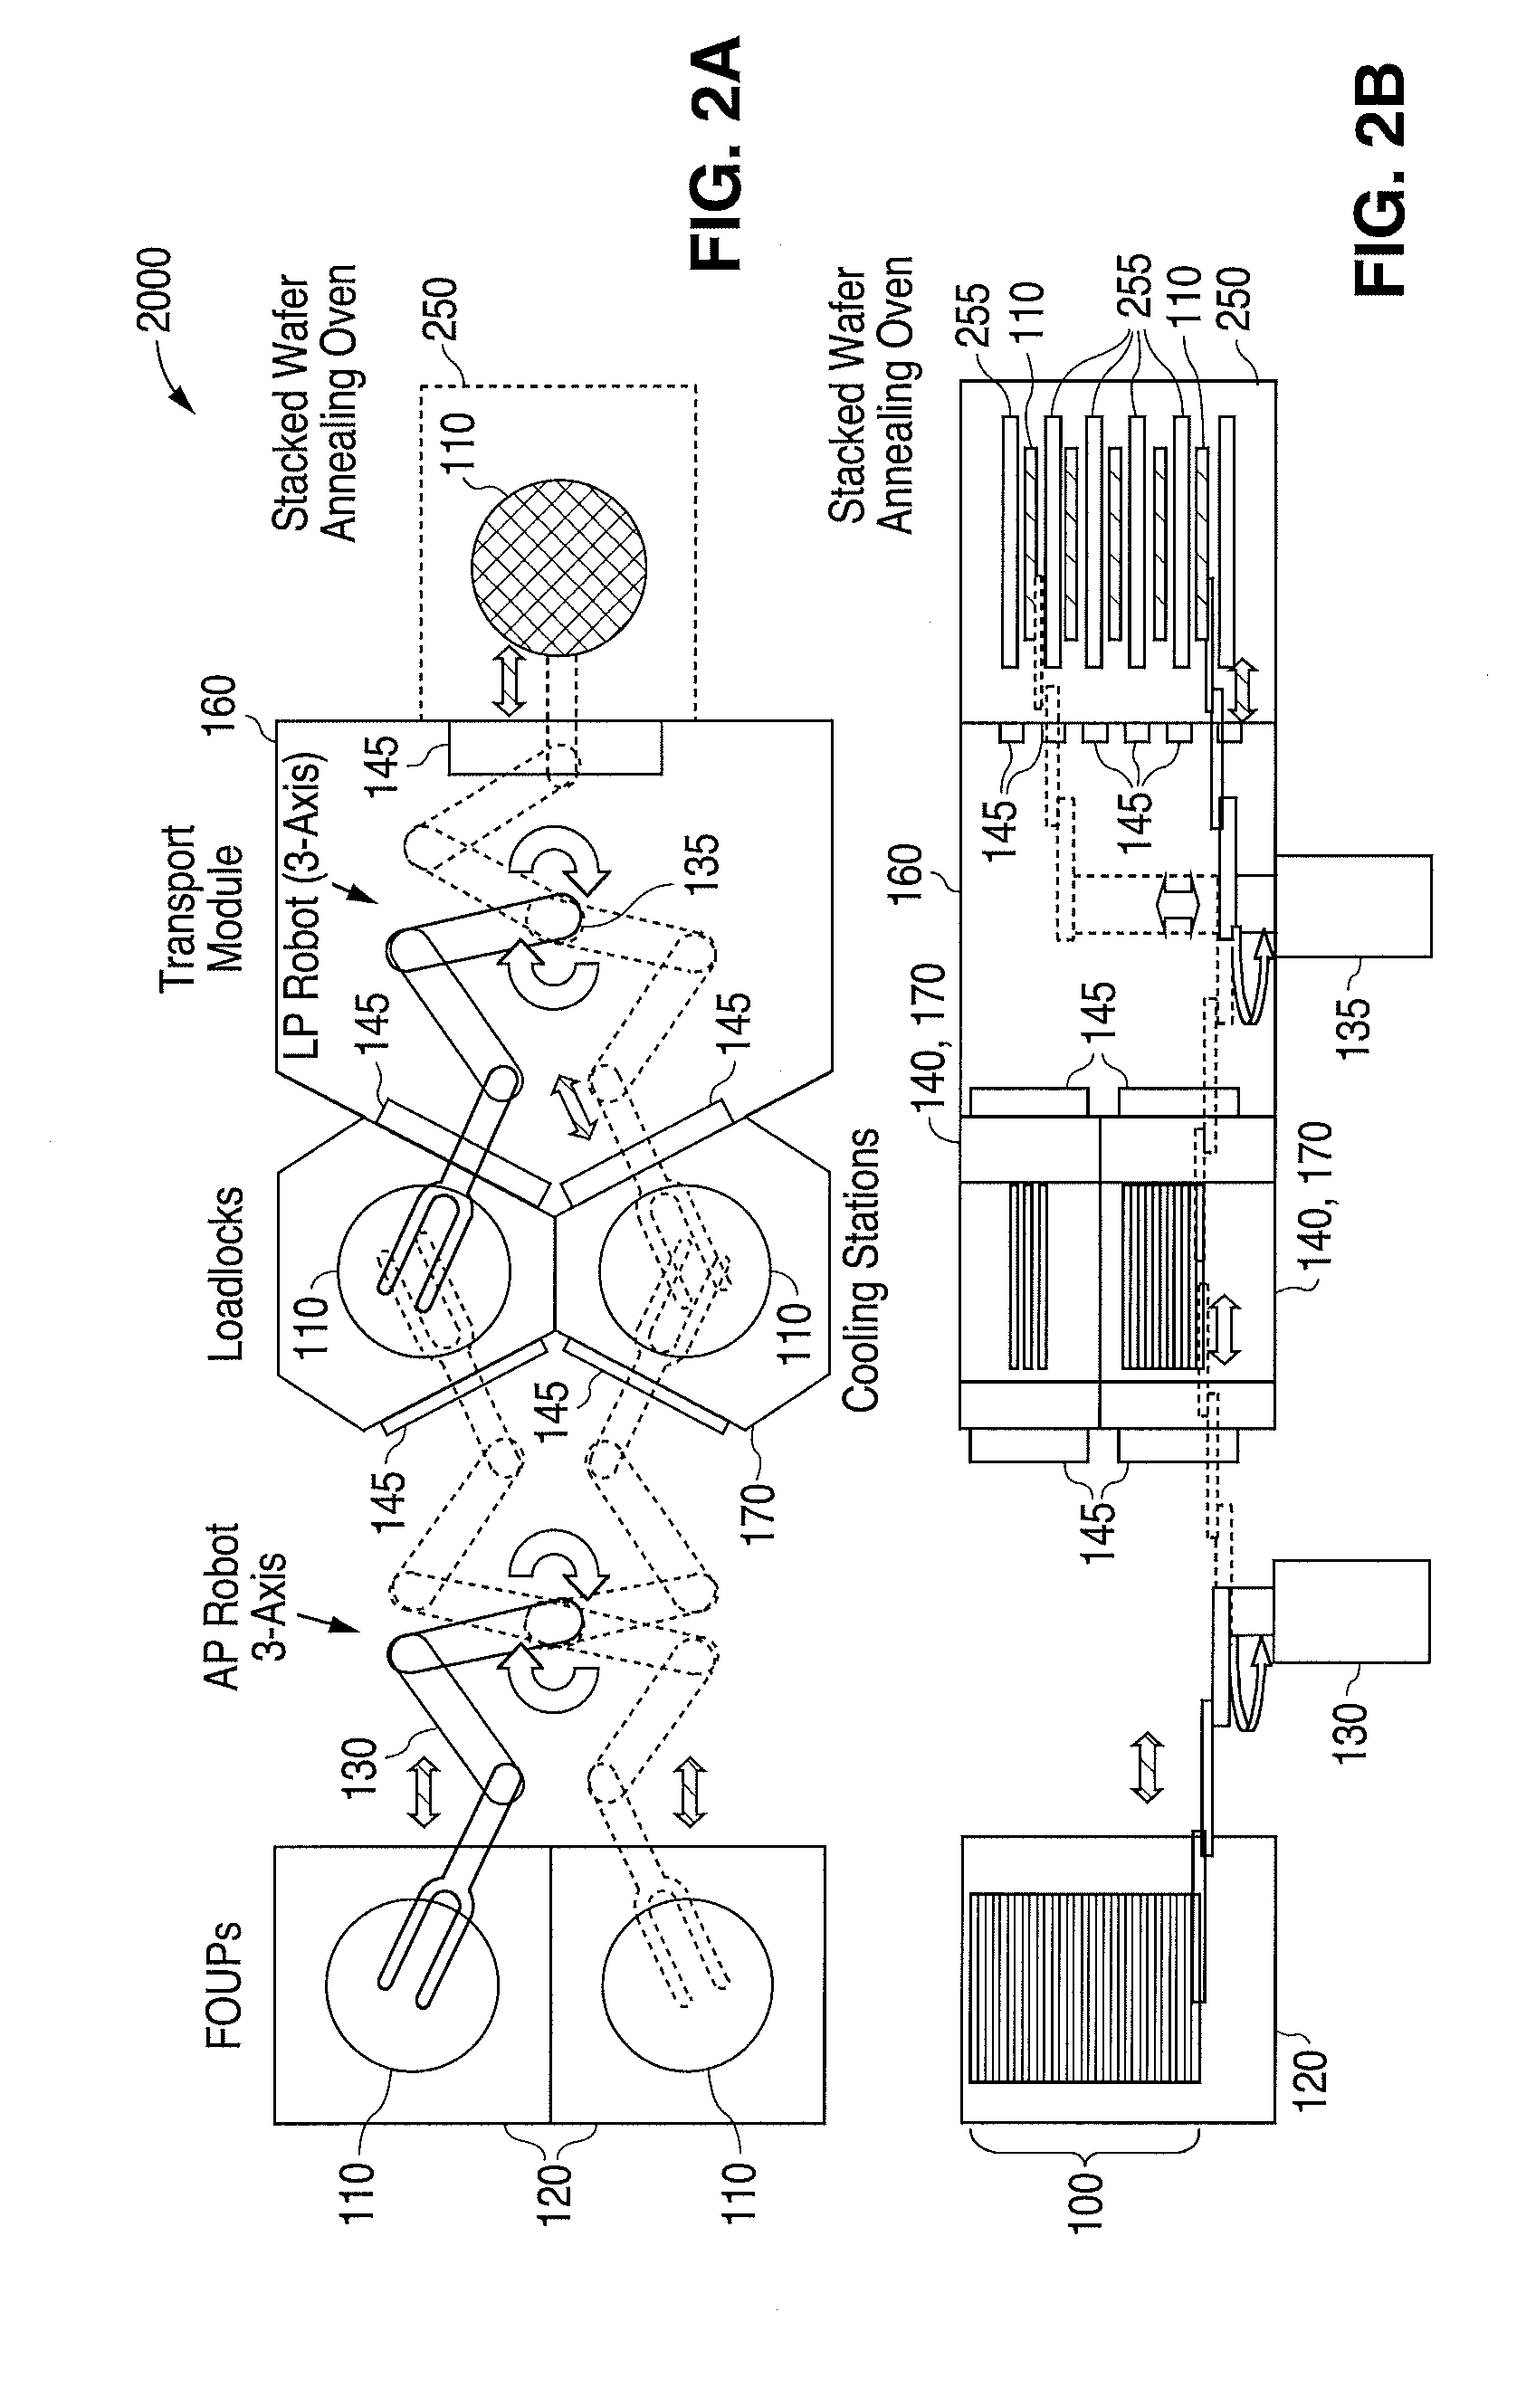 In-line wafer robotic processing system